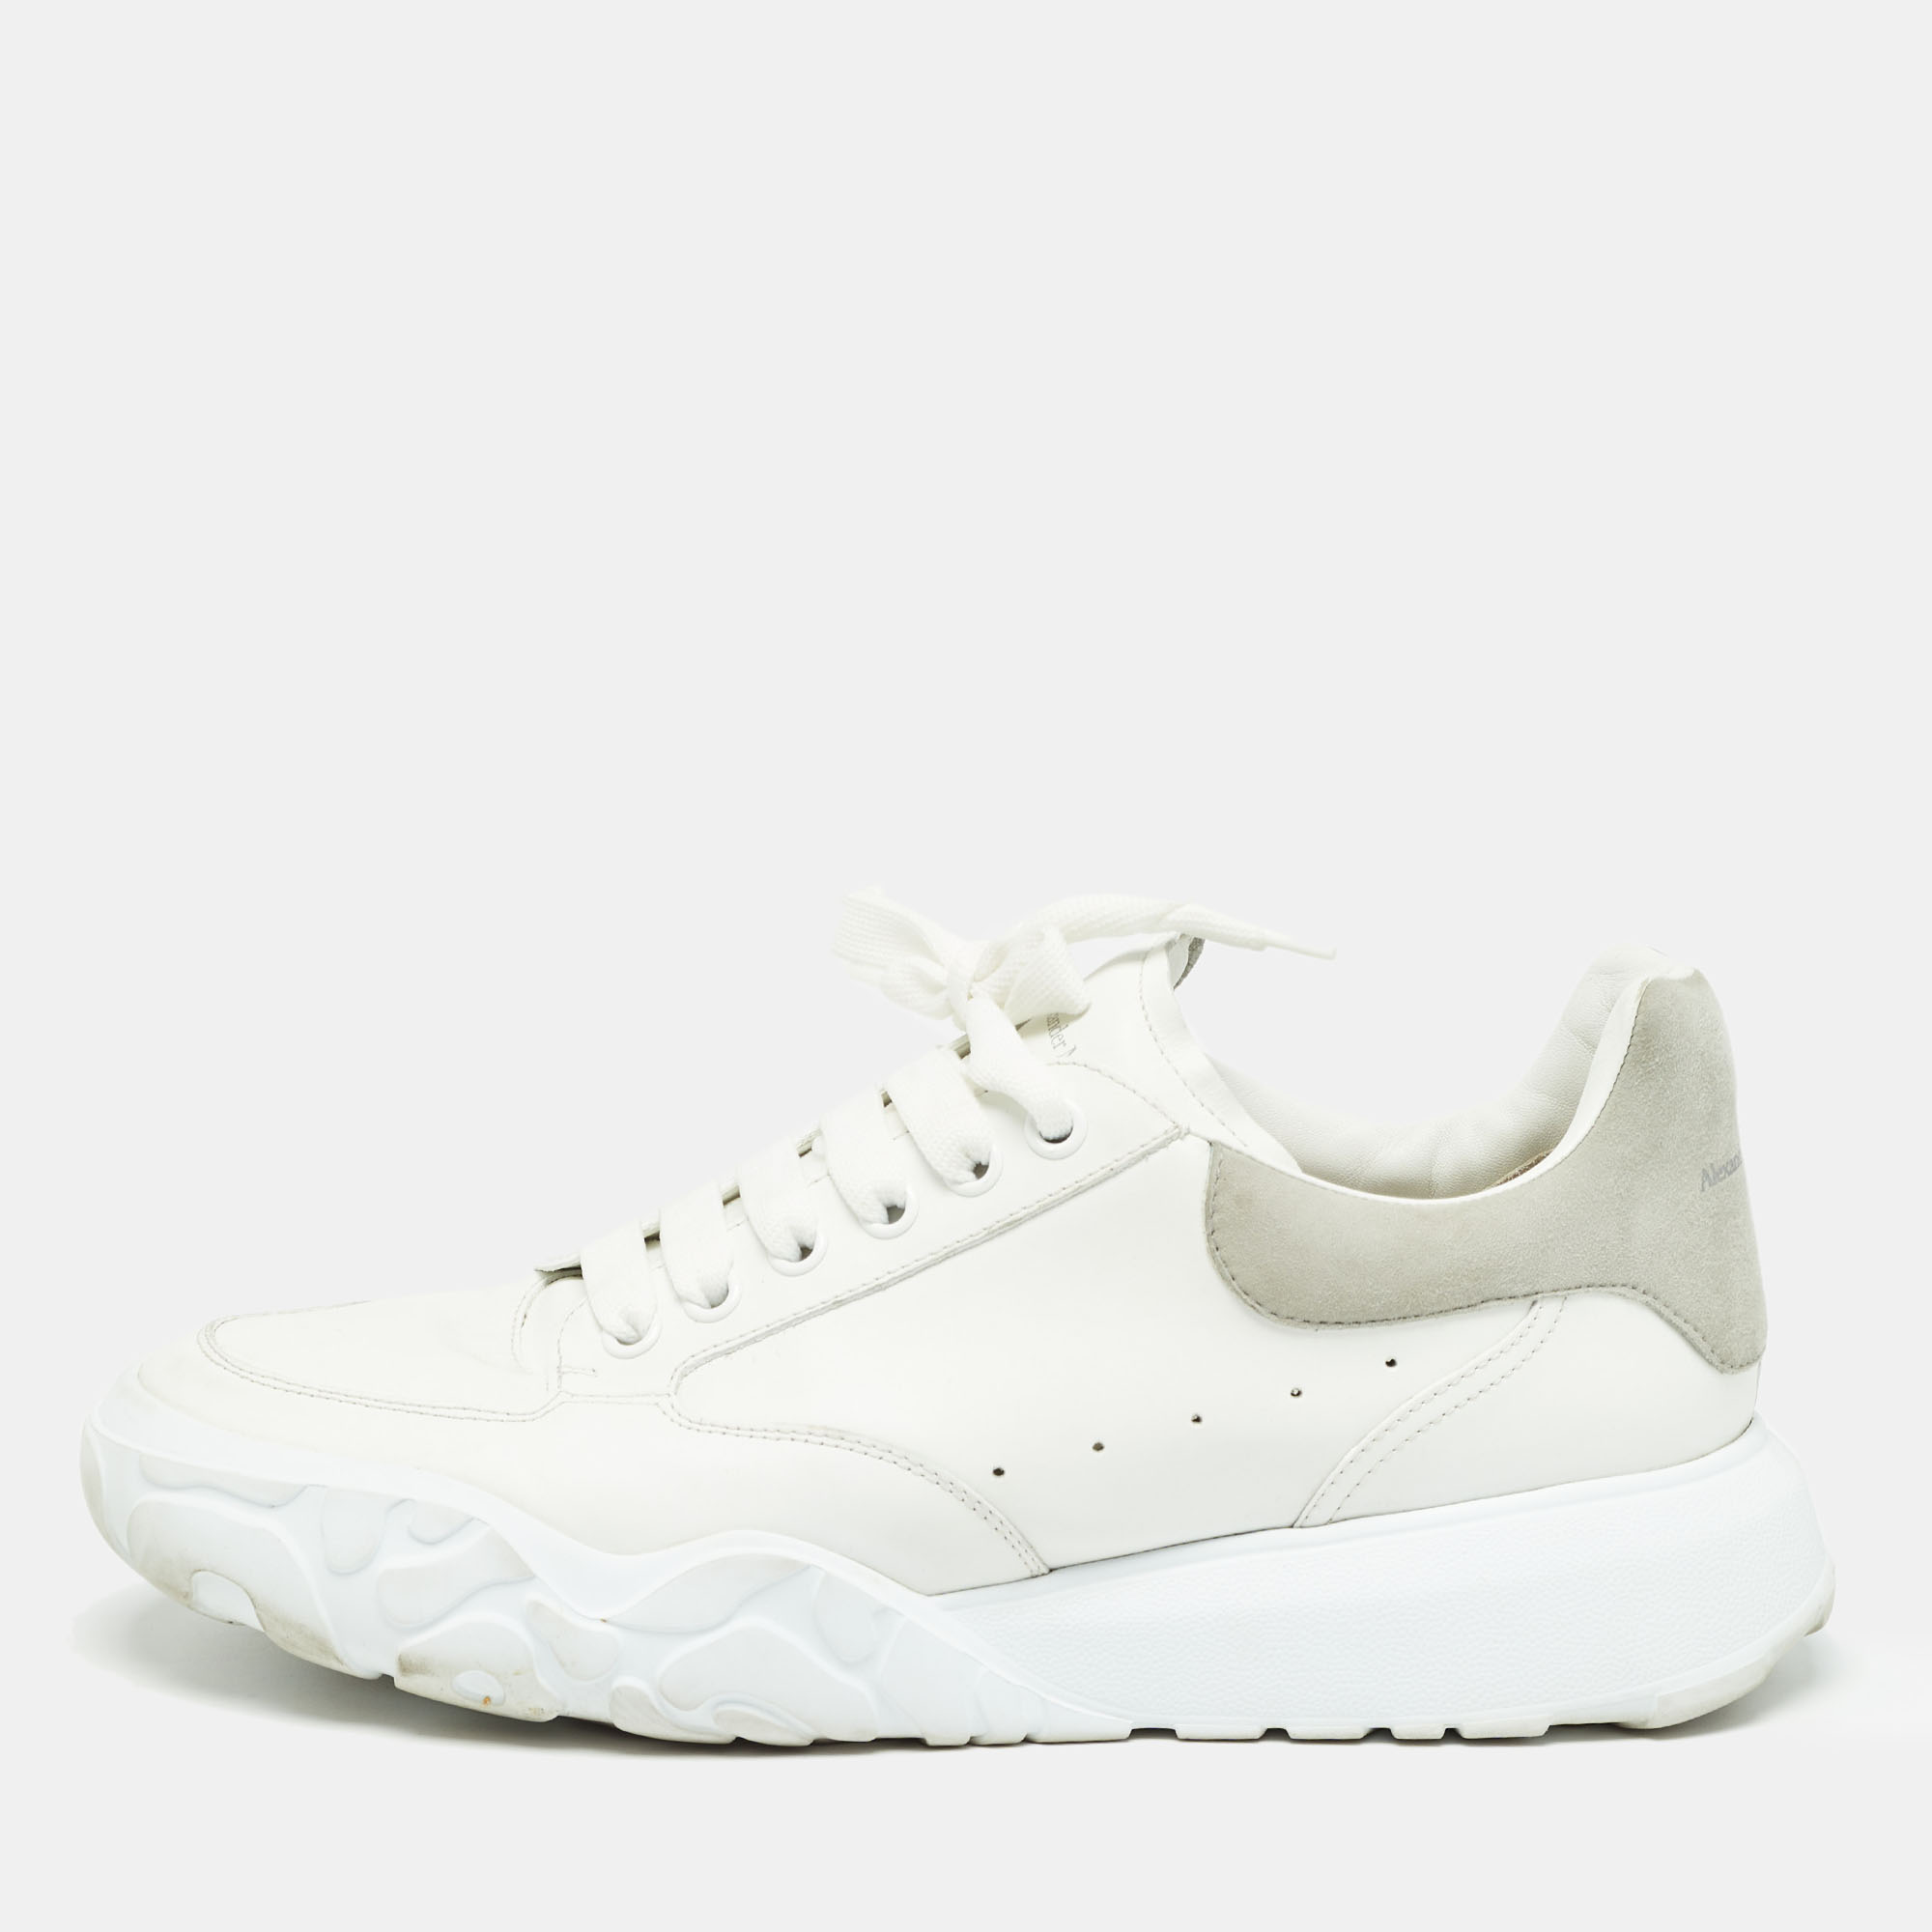 

Alexander McQueen White/Grey Suede and Leather Oversized Low Top Sneakers Size